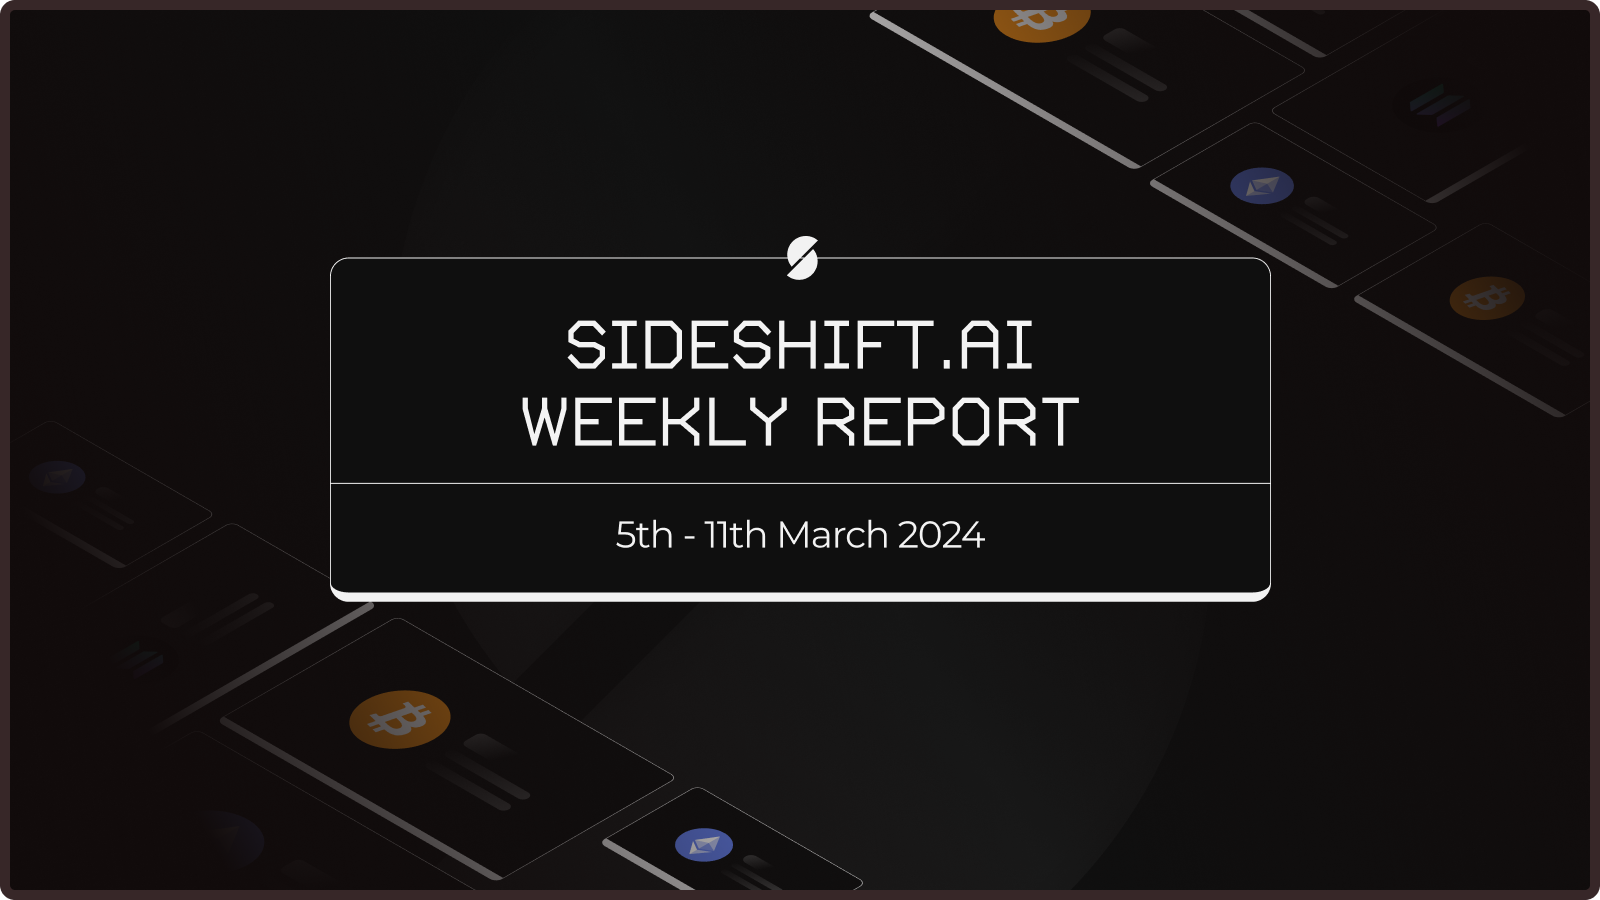 SideShift.ai Weekly Report | 5th - 11th March 2024